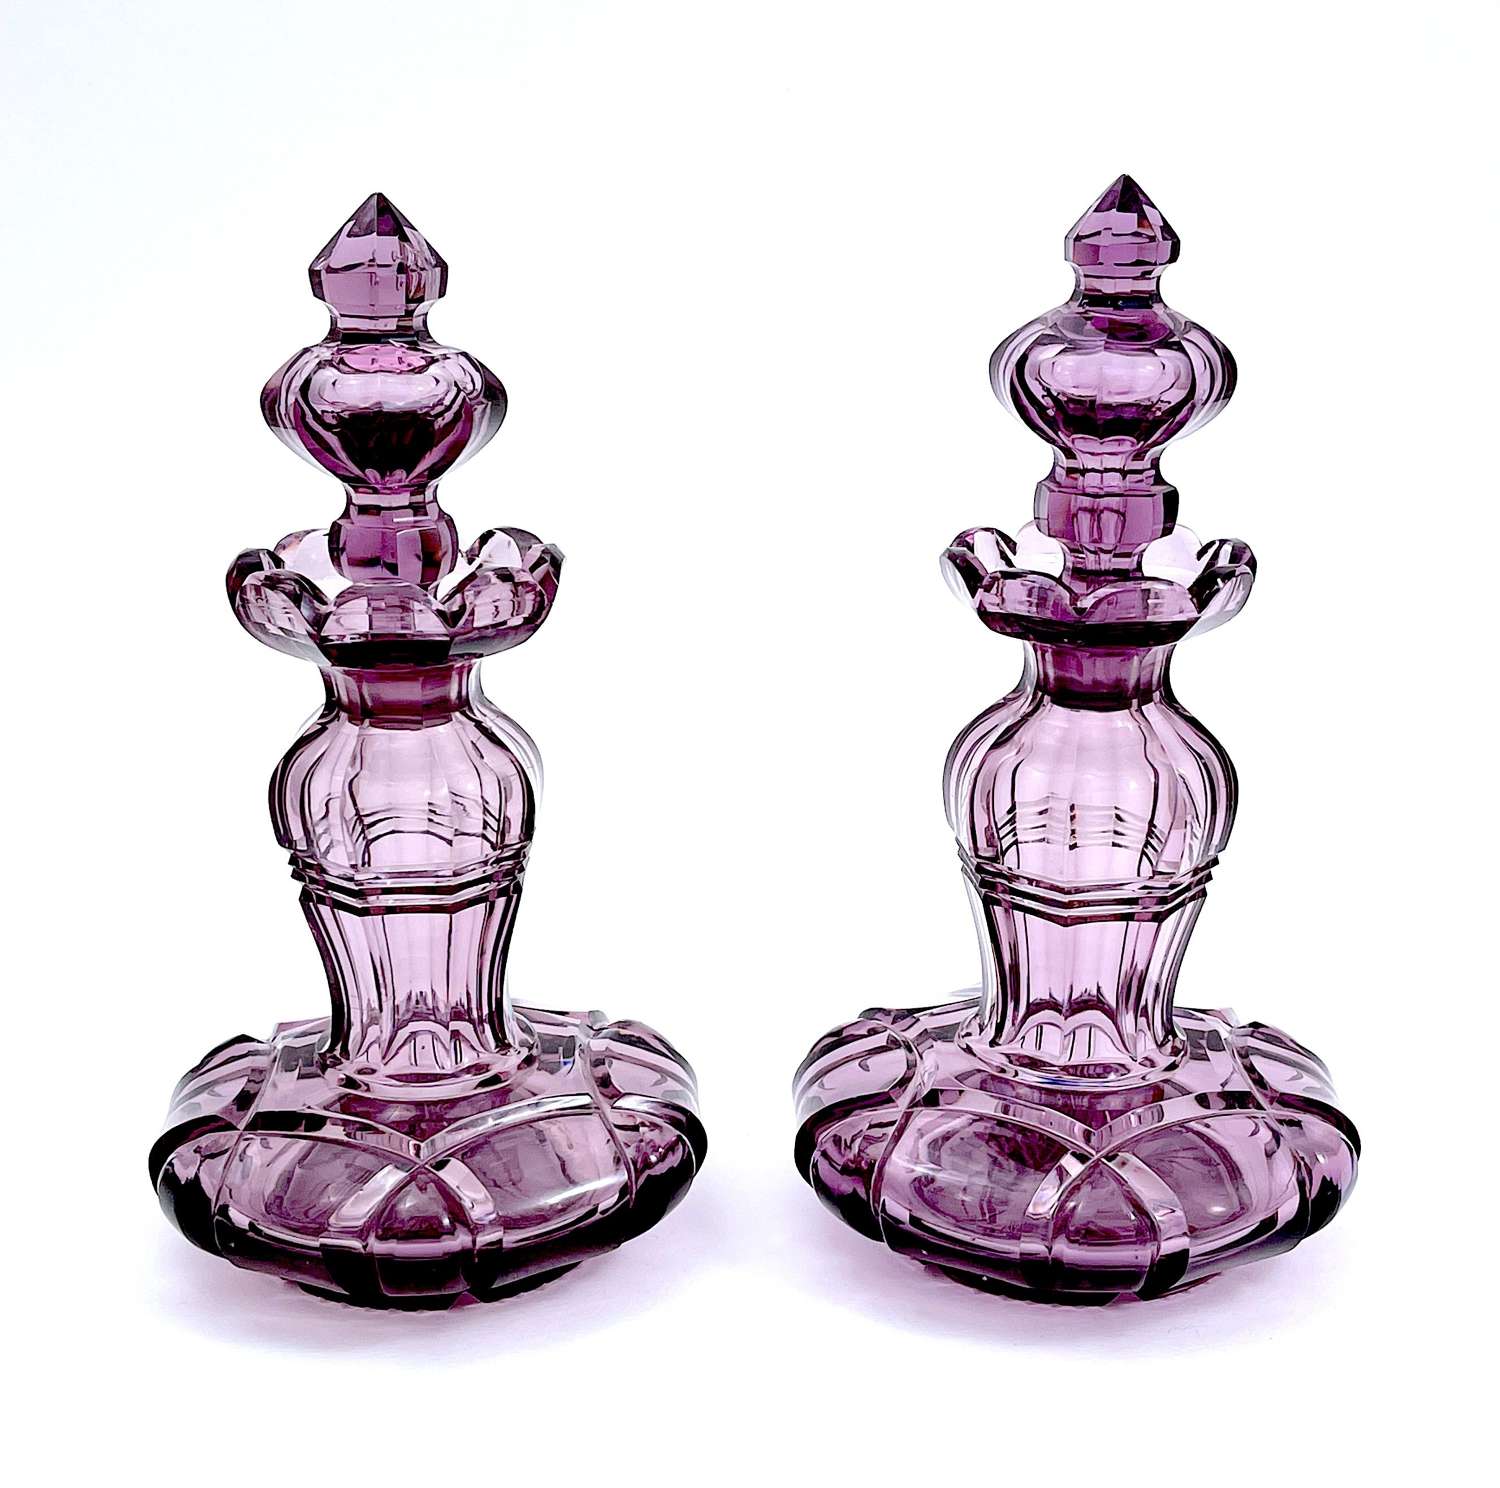 Pair of Antique French Amethyst Cut Crystal Perfume Bottles